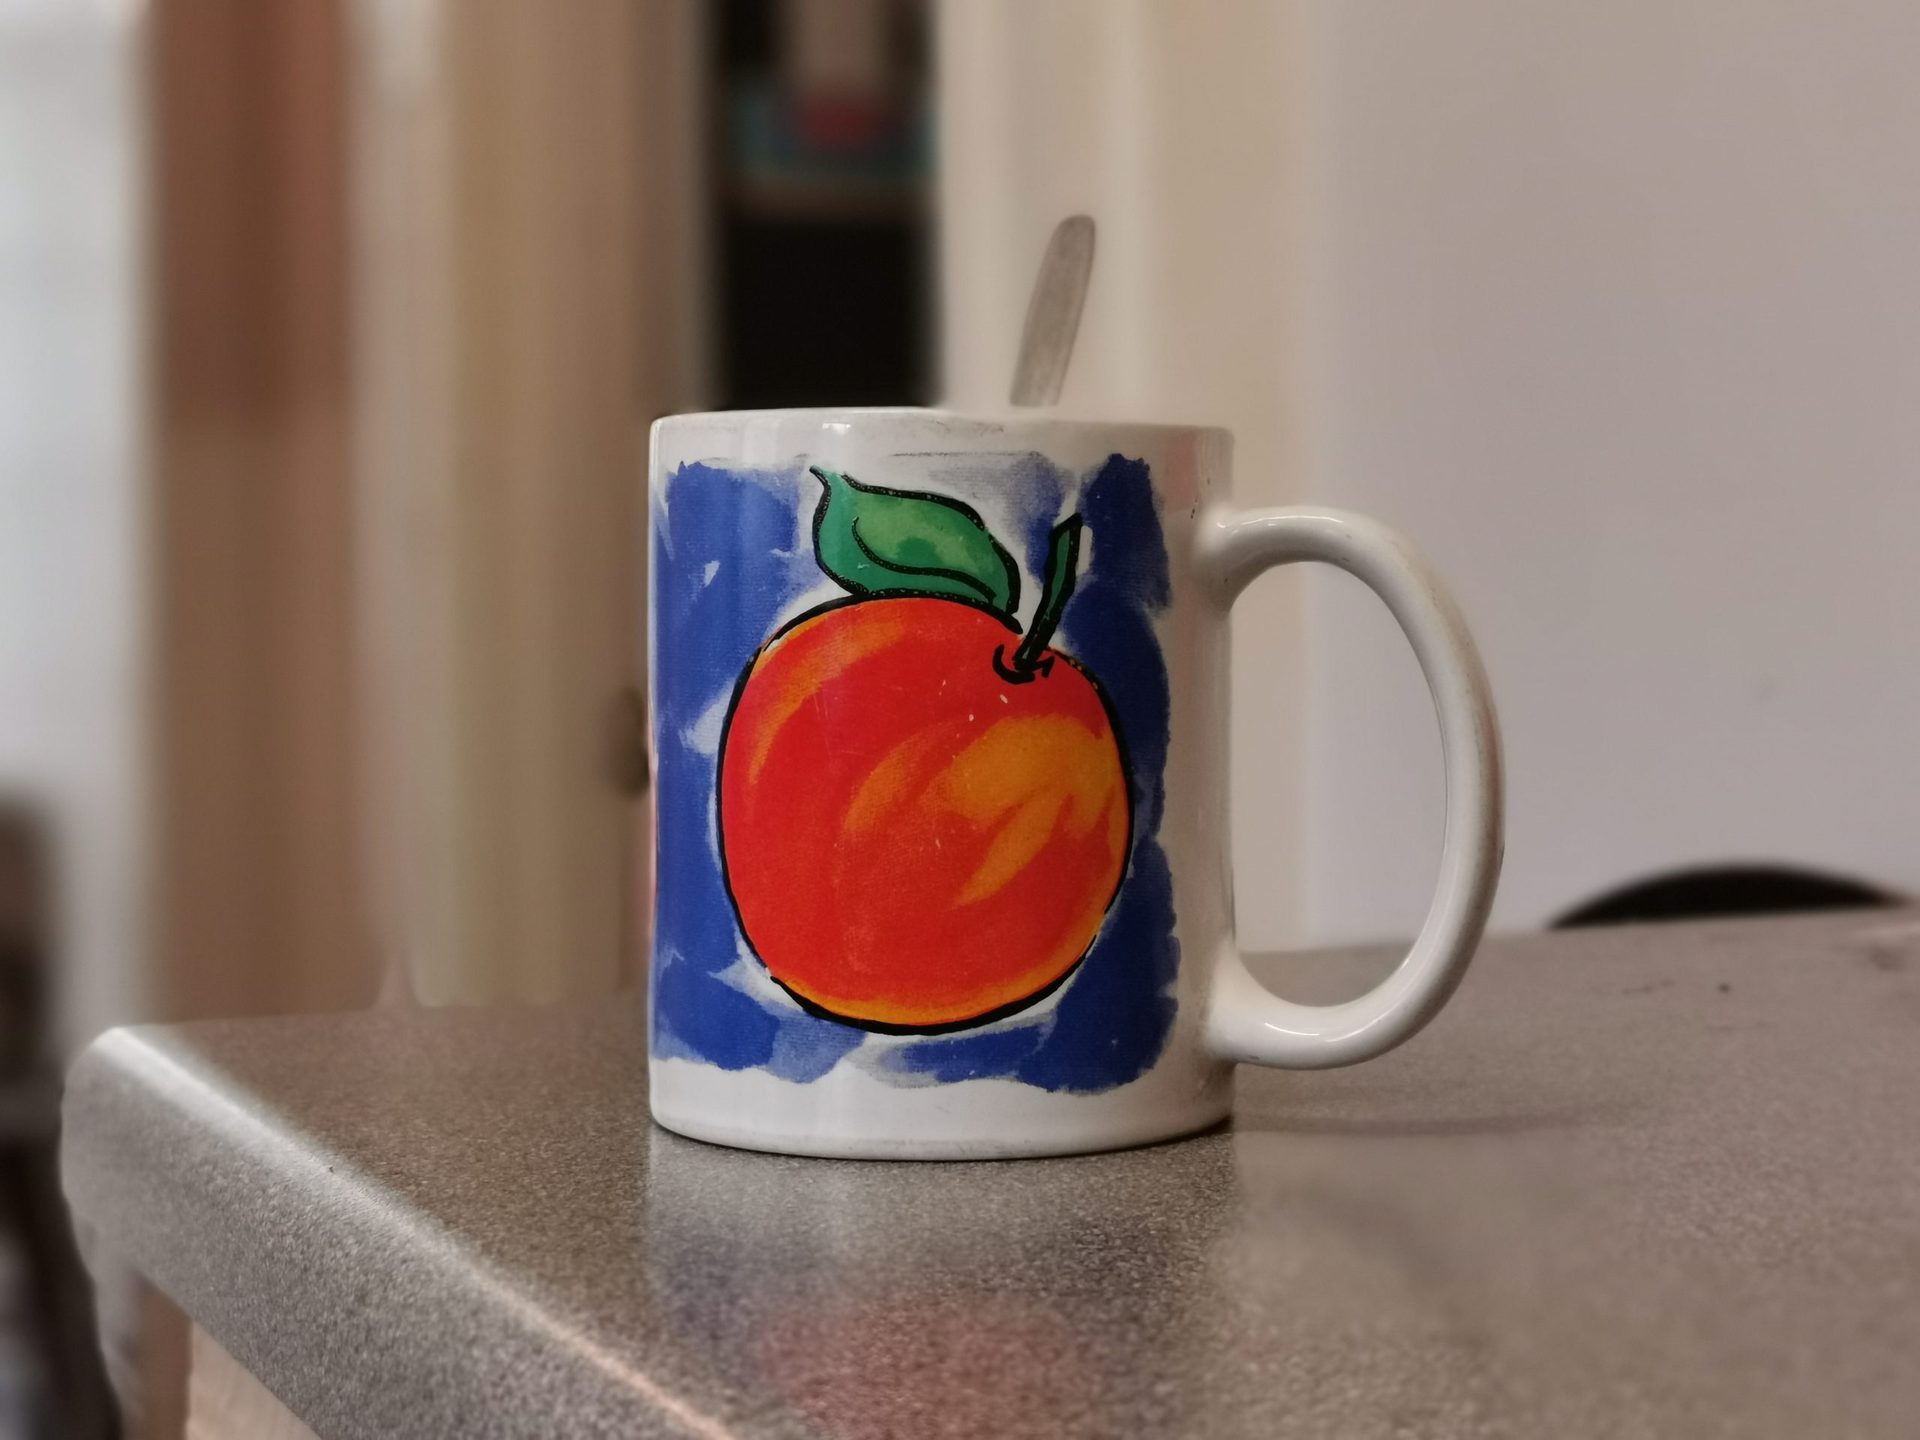 HUAWEI P30 Pro aperture mode photo sample of a cup of tea